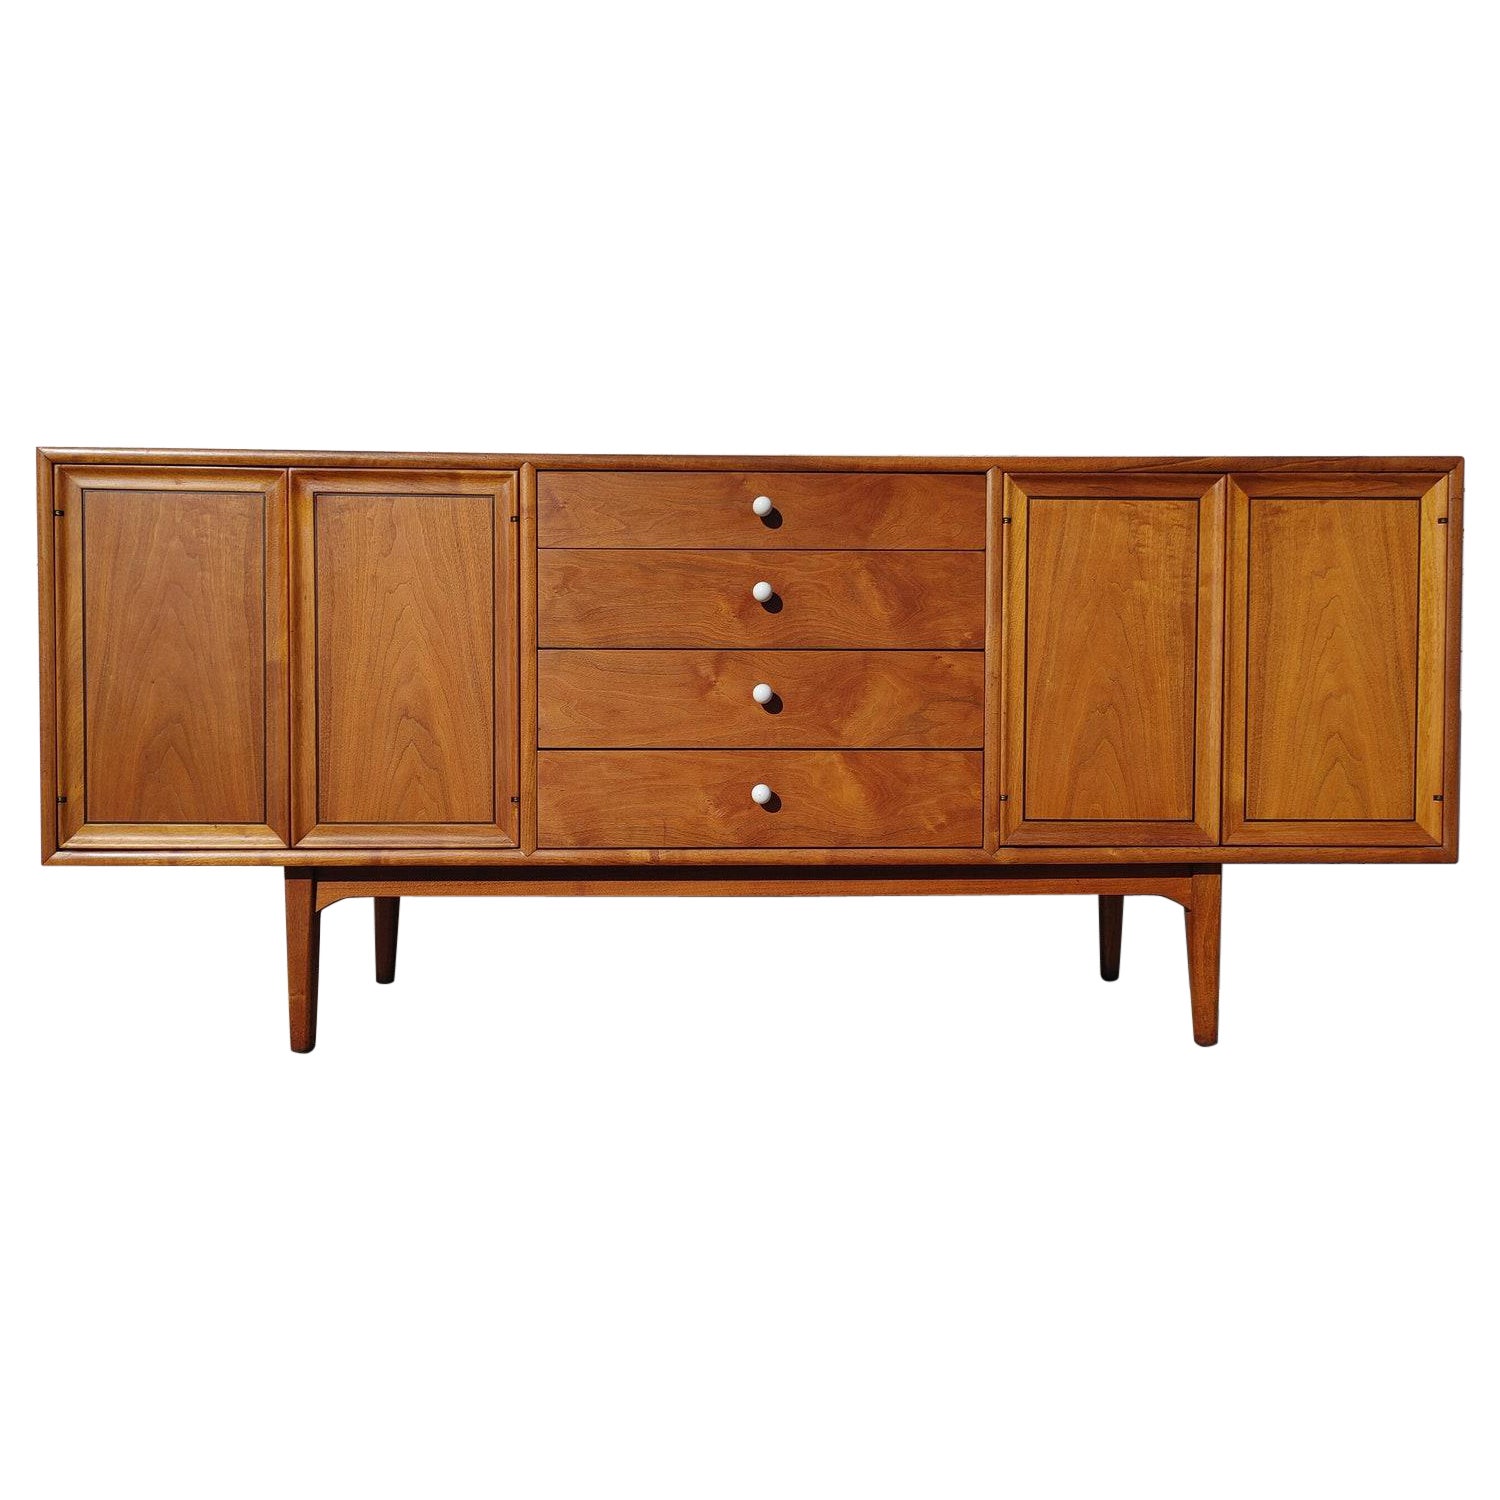 What is the difference between a sideboard and a hutch?